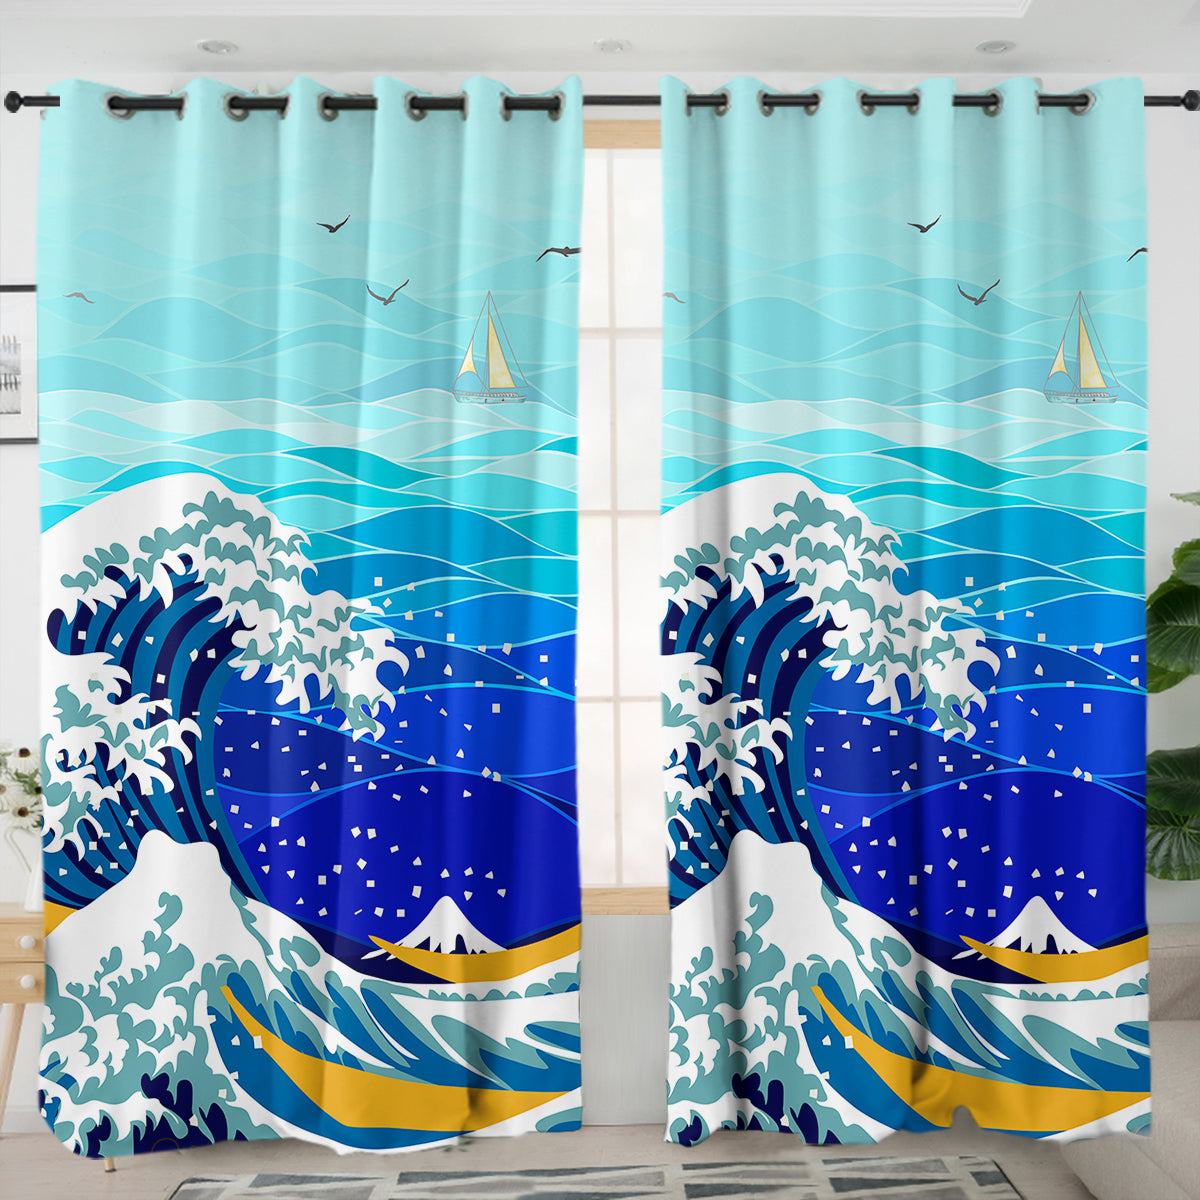 The Great Wave Curtains